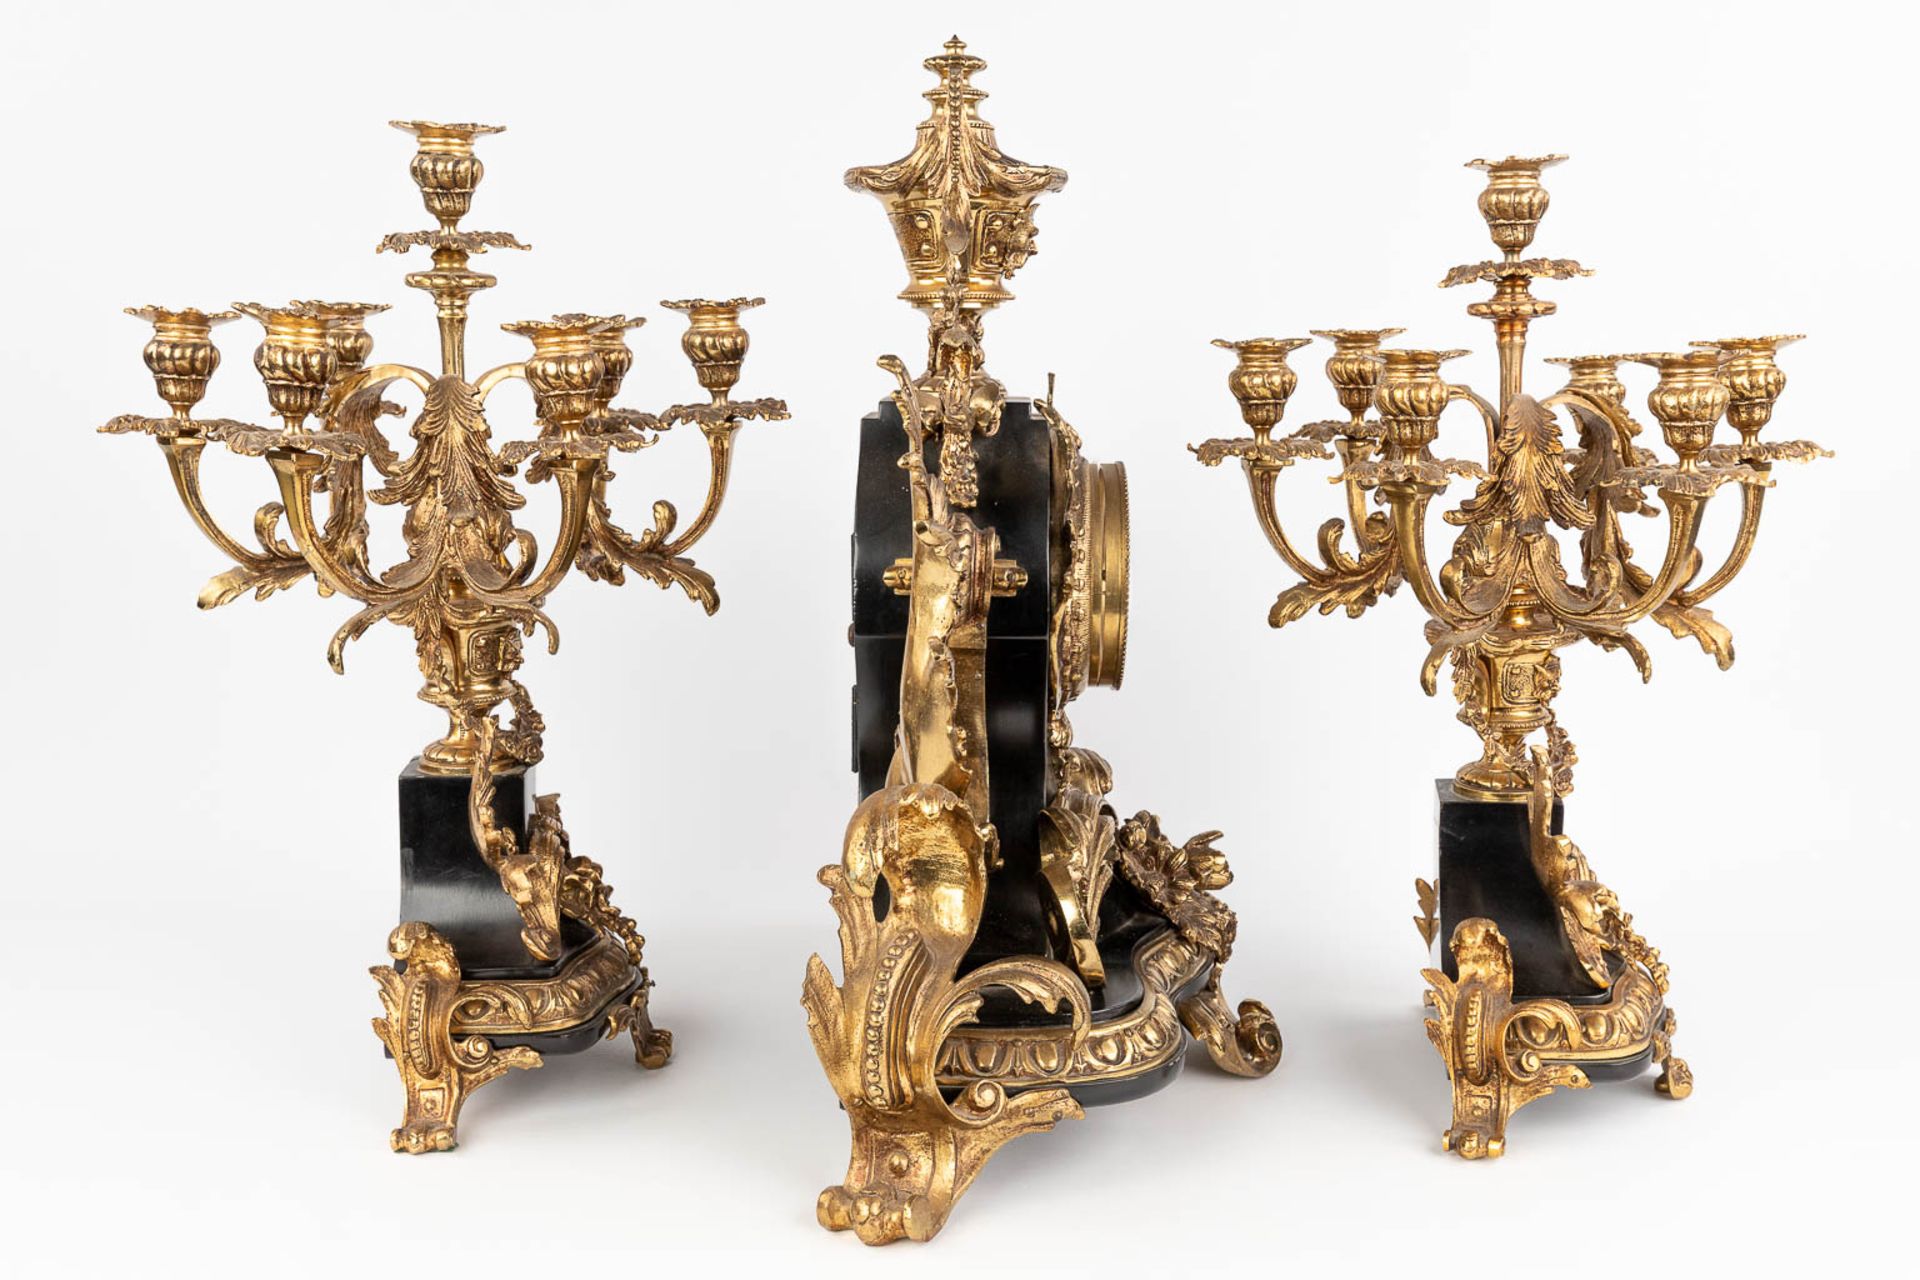 A three-piece mantle garniture clock and candelabra, Louis XV style. Circa 1970. (D:25 x W:51 x H:55 - Image 4 of 14